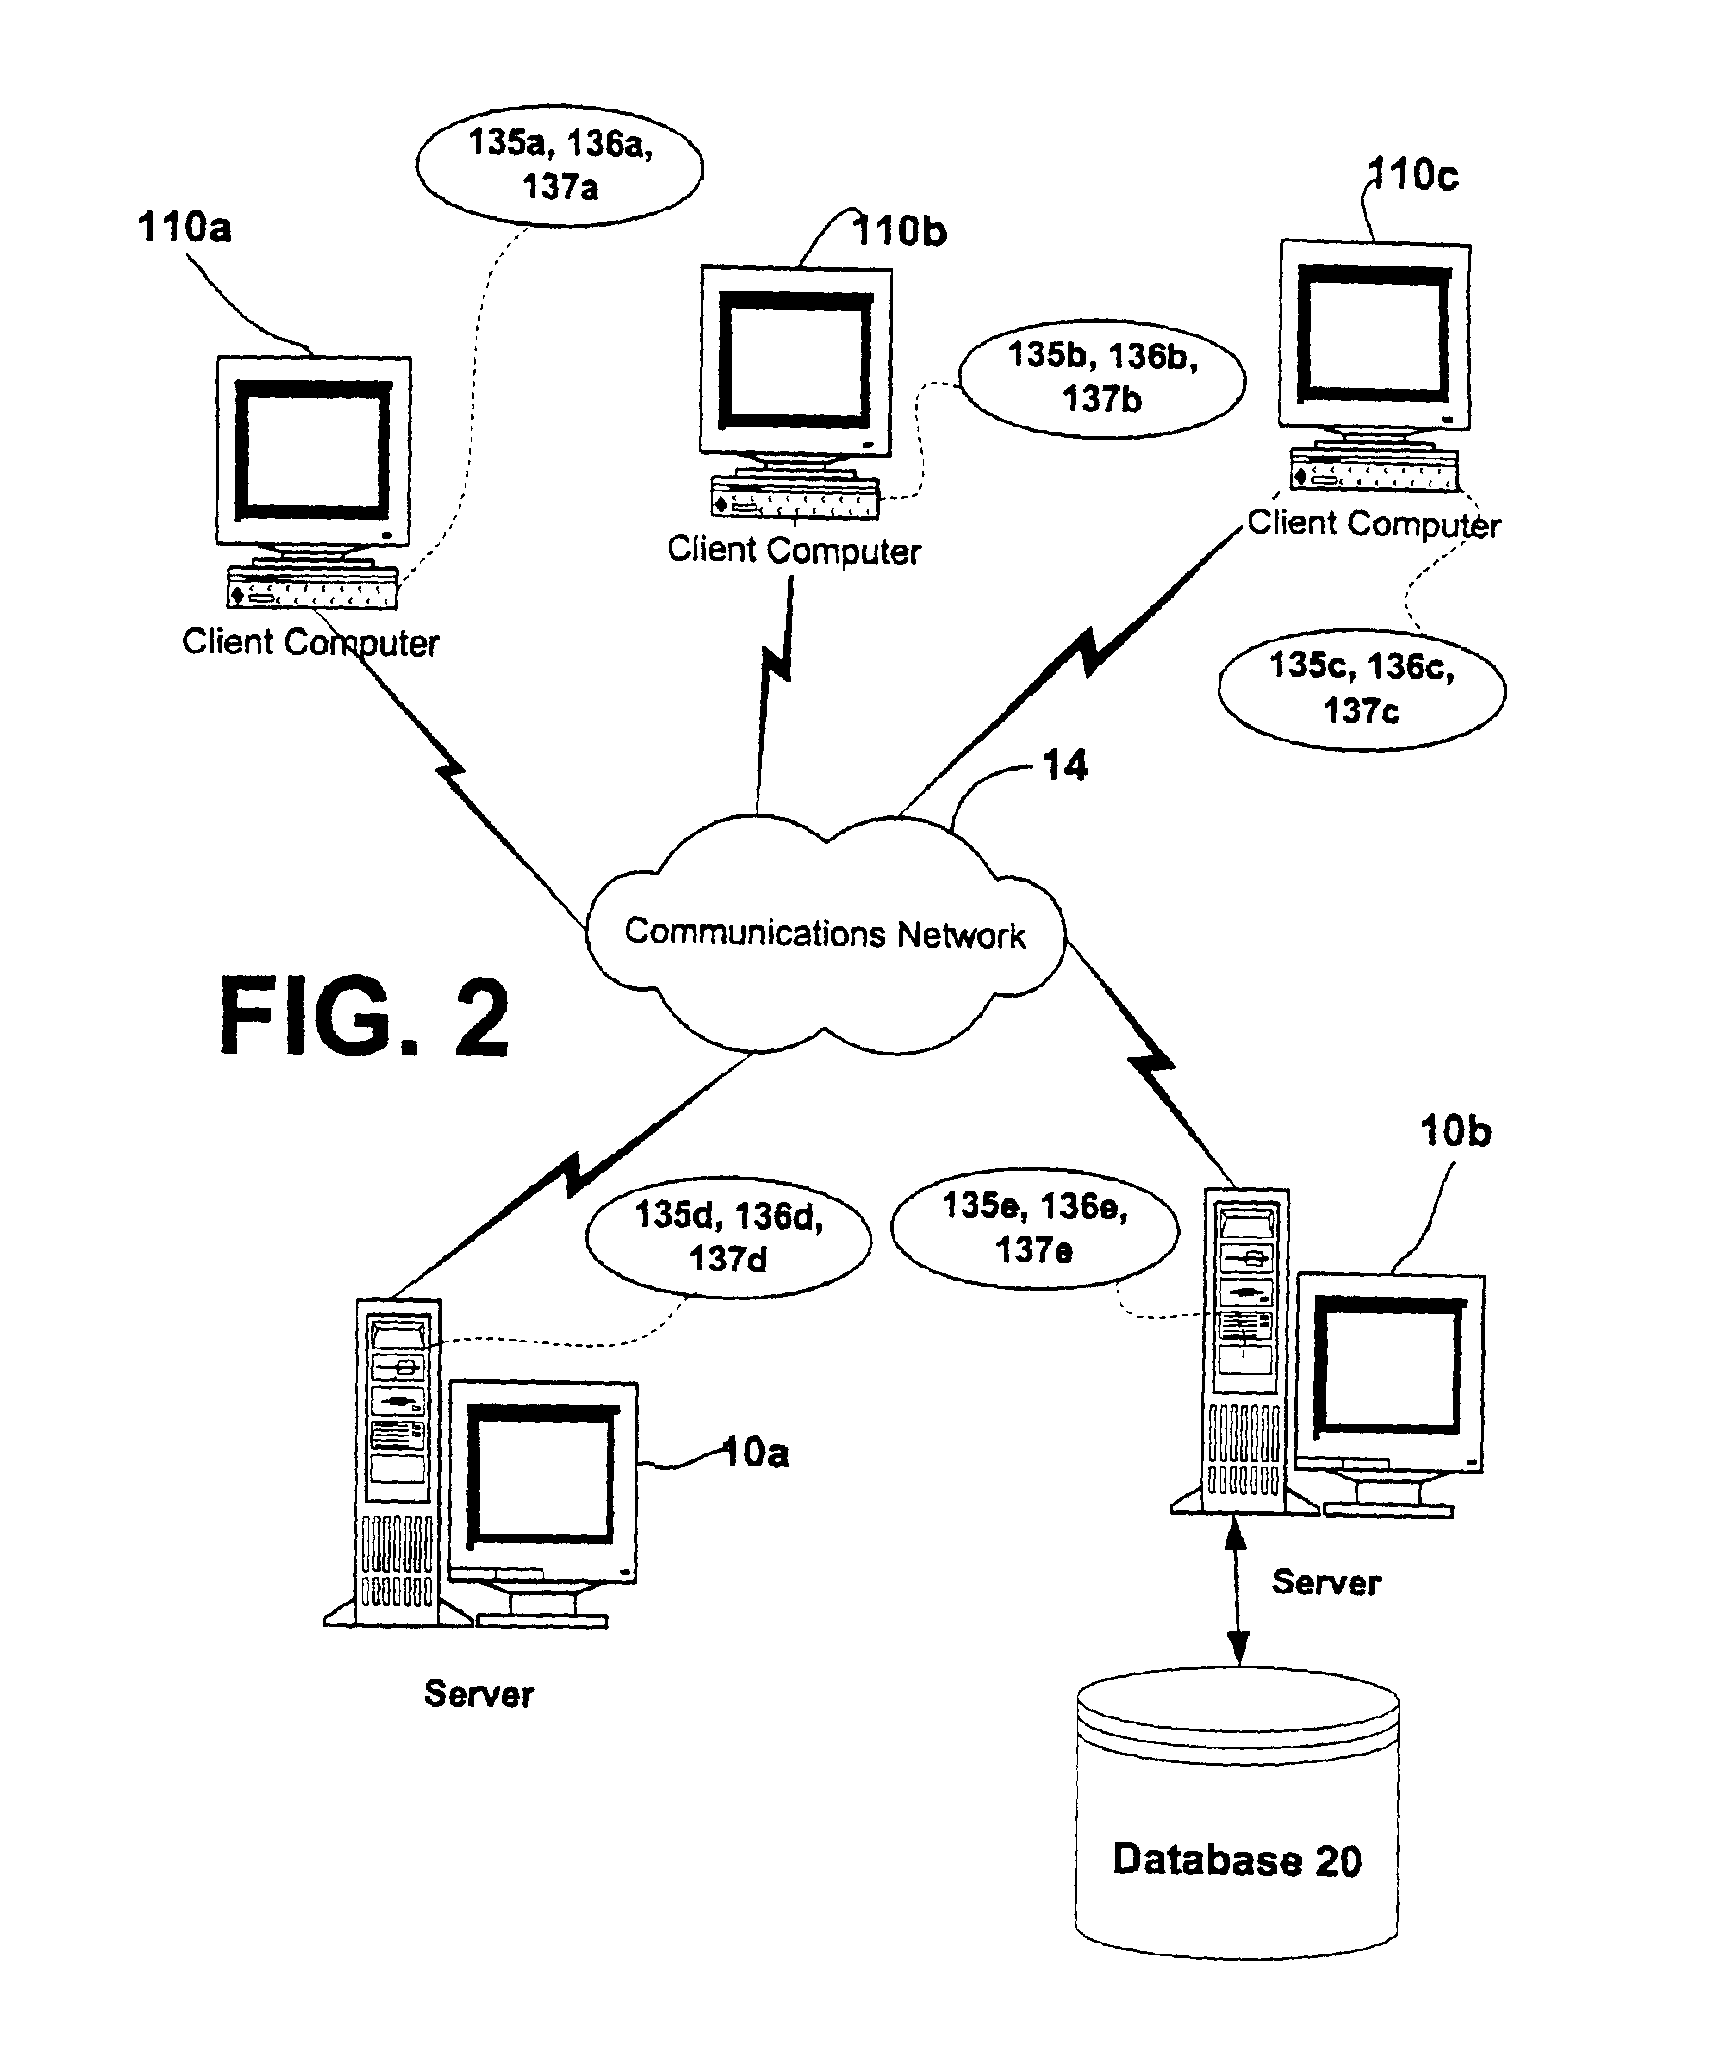 Method and system for maintaining connections between surfaces and objects in a graphics display system